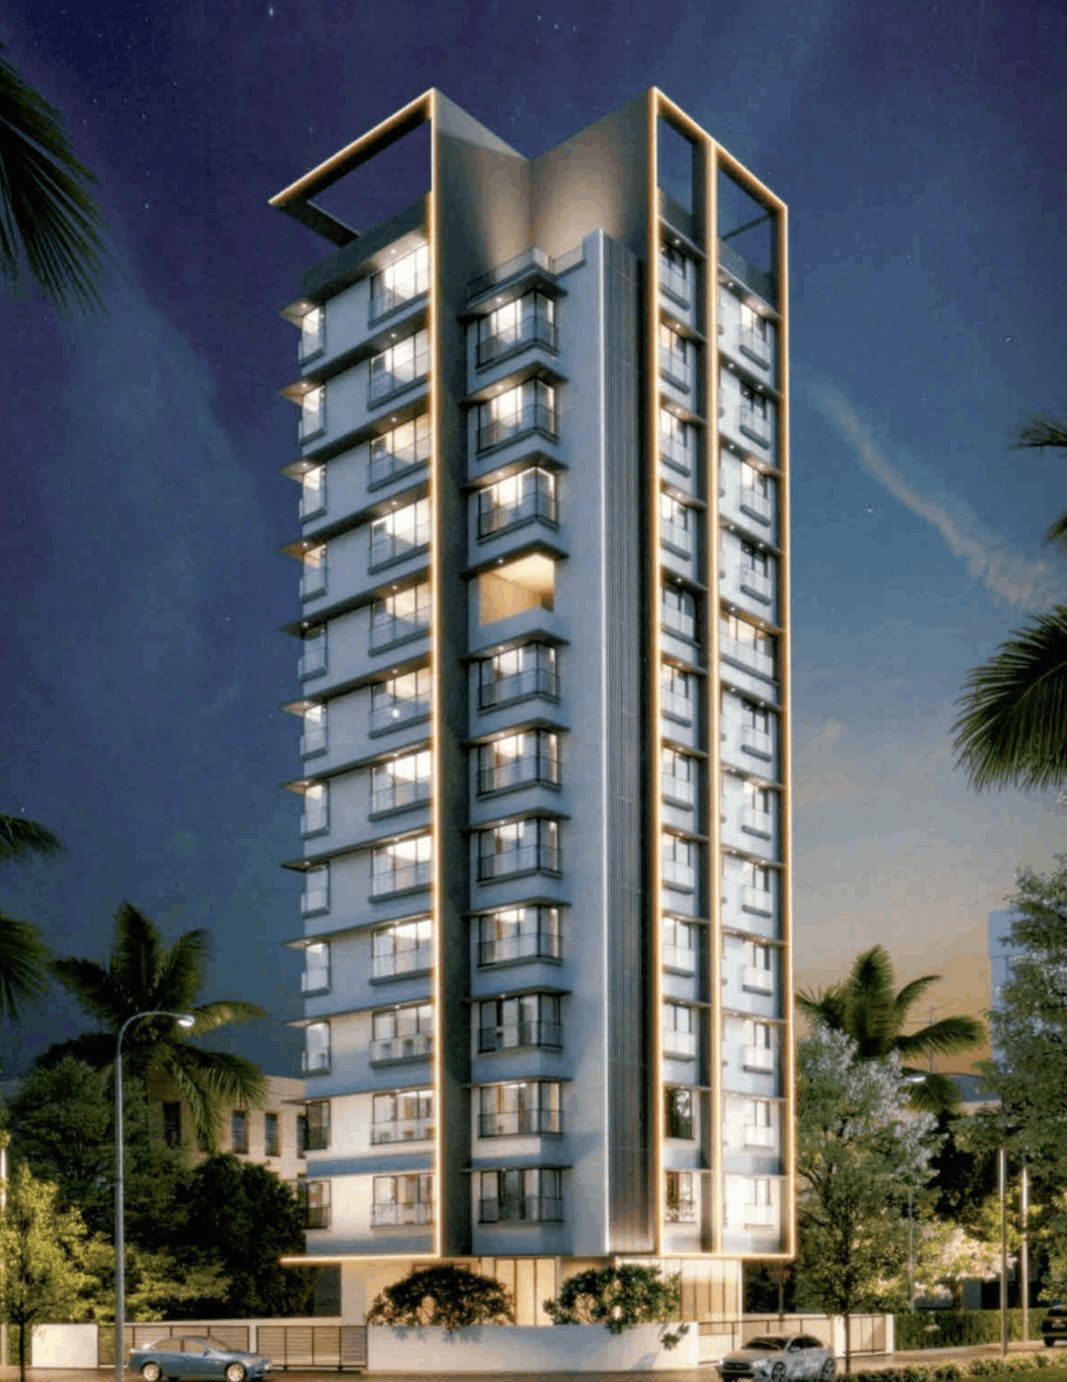 1 Bed/ 2 Bath Sell Apartment/ Flat; 460 sq. ft. carpet area; Under Construction for sale @Bhandup east 